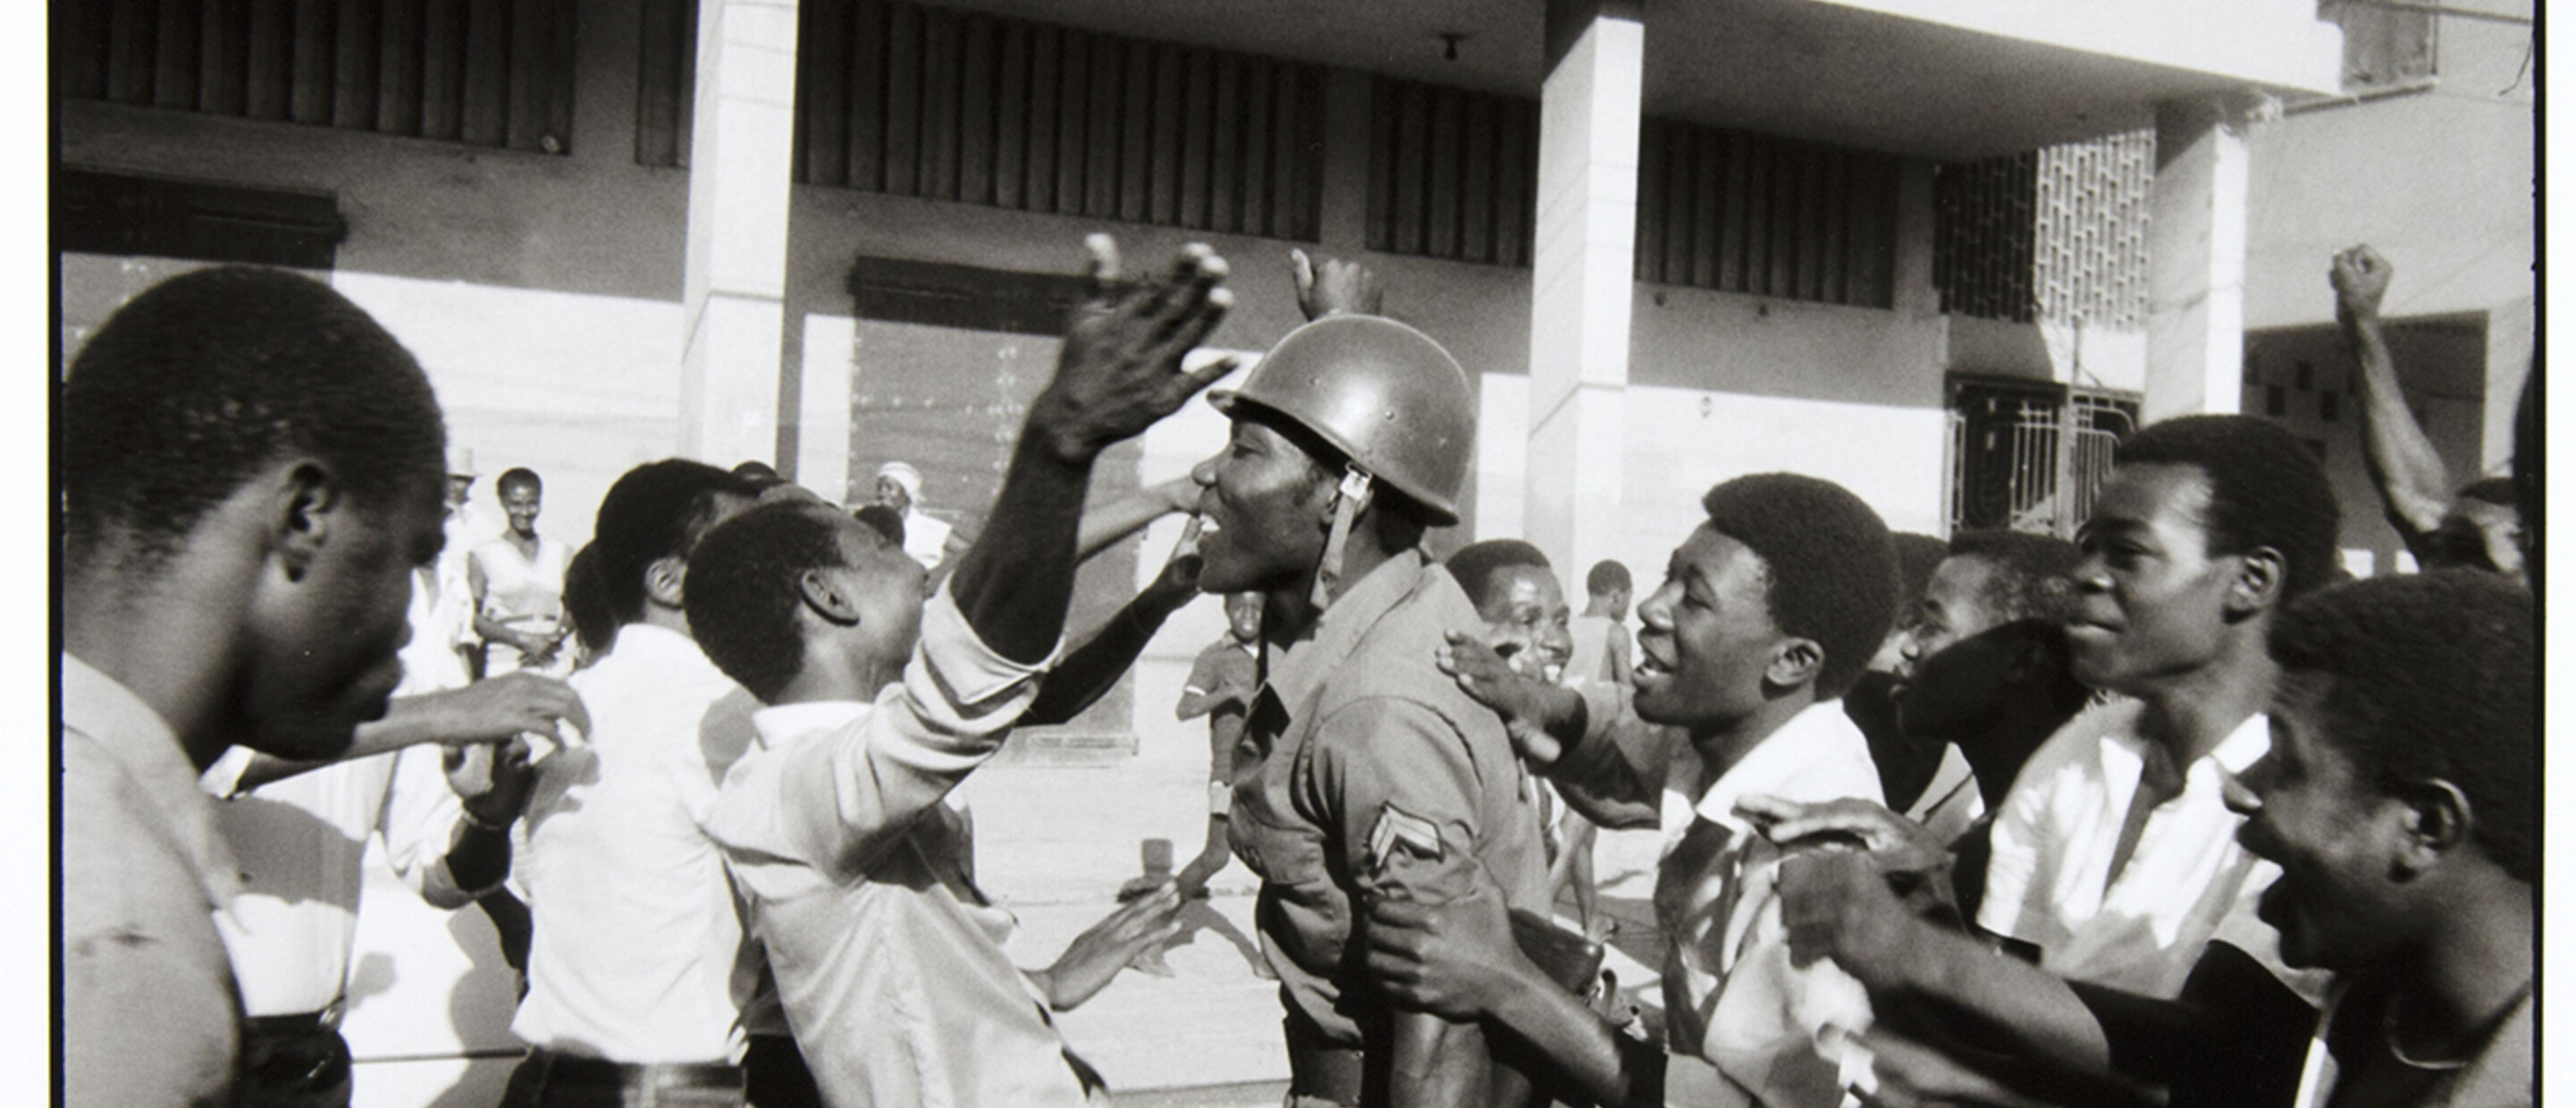 Danny Lyons, The soldier is greeted as hero. February 7, Port-au-Prince, 1983-86, Silver gelatin print, 8 1/2 x 13 in.